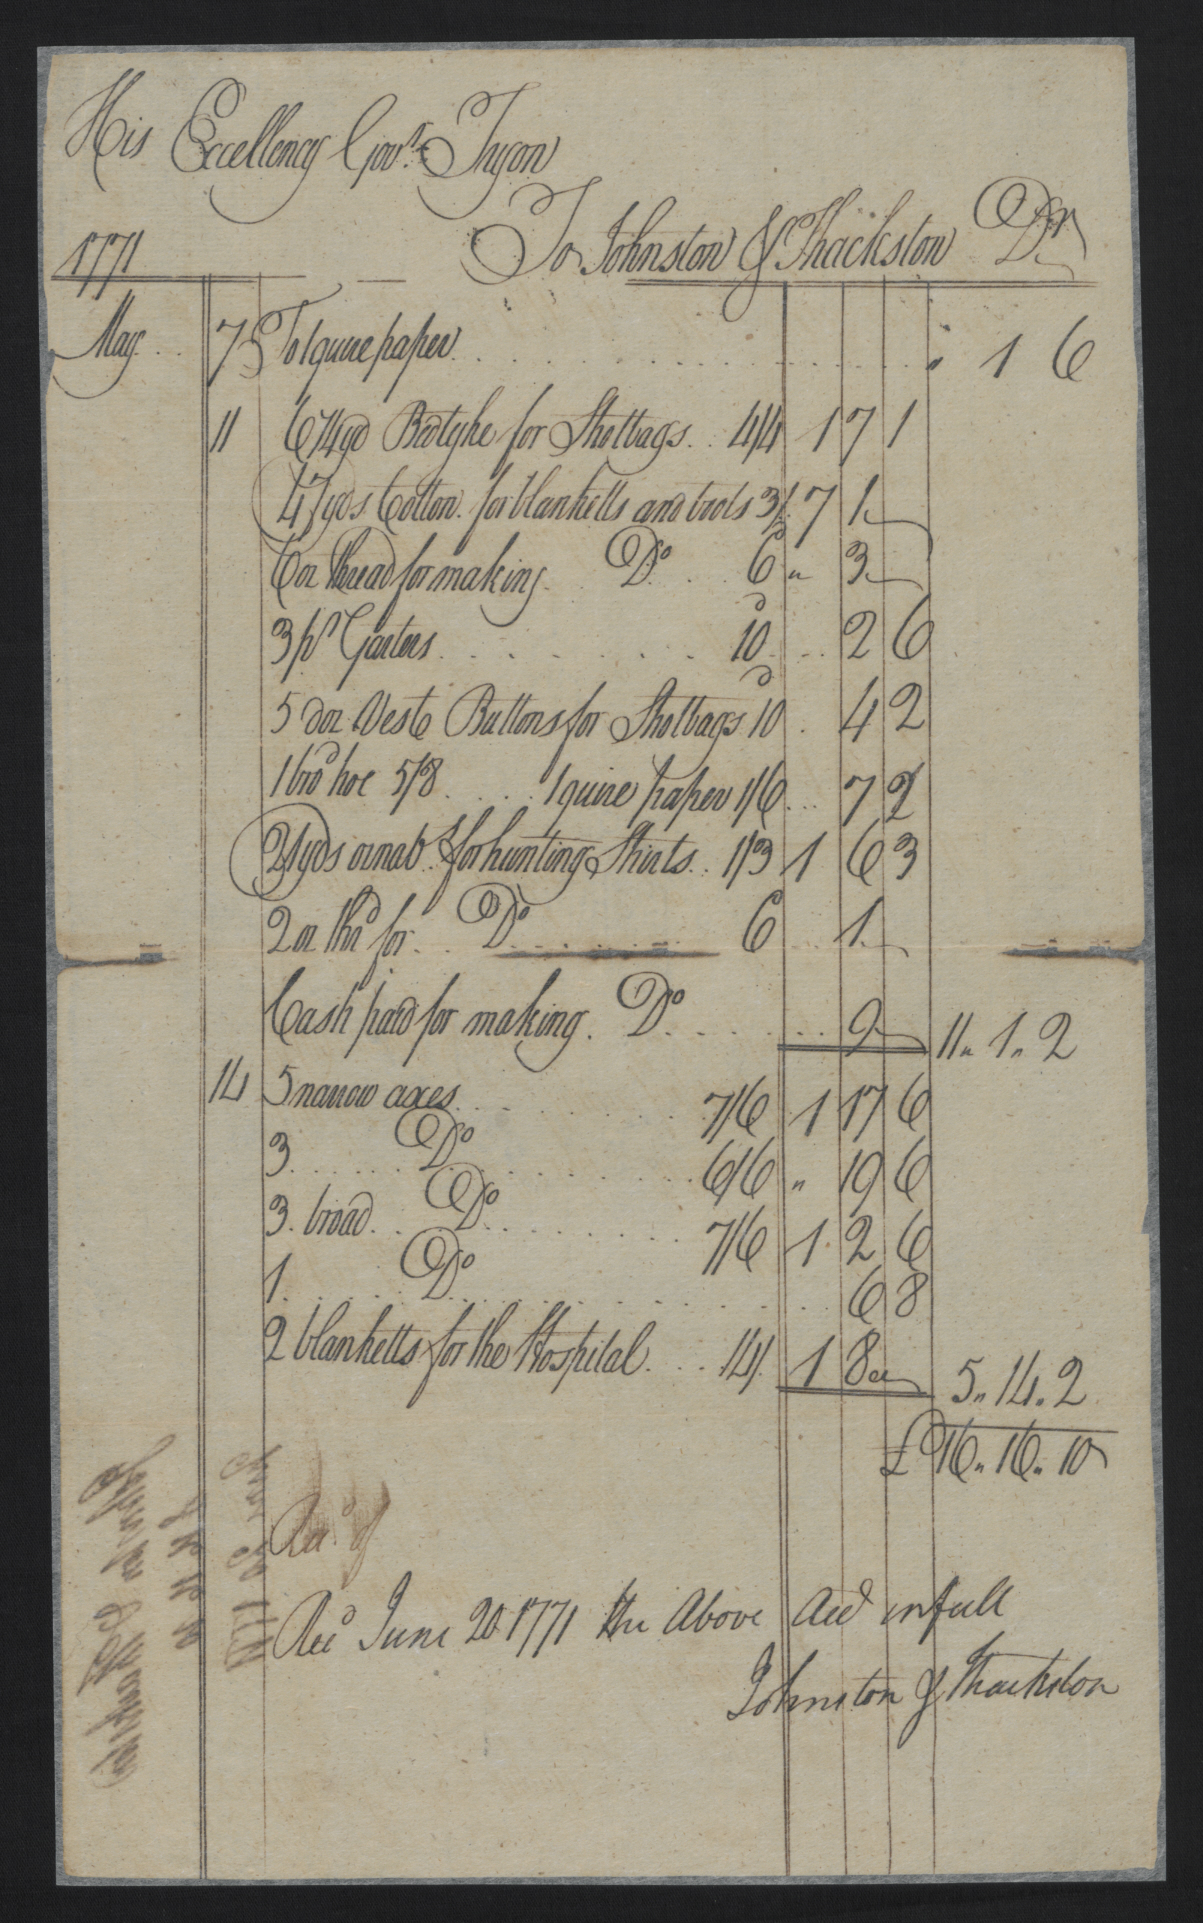 Invoice from James Thackston and William Johnston to the Militia for Supplies, June 20th 1771, page 1